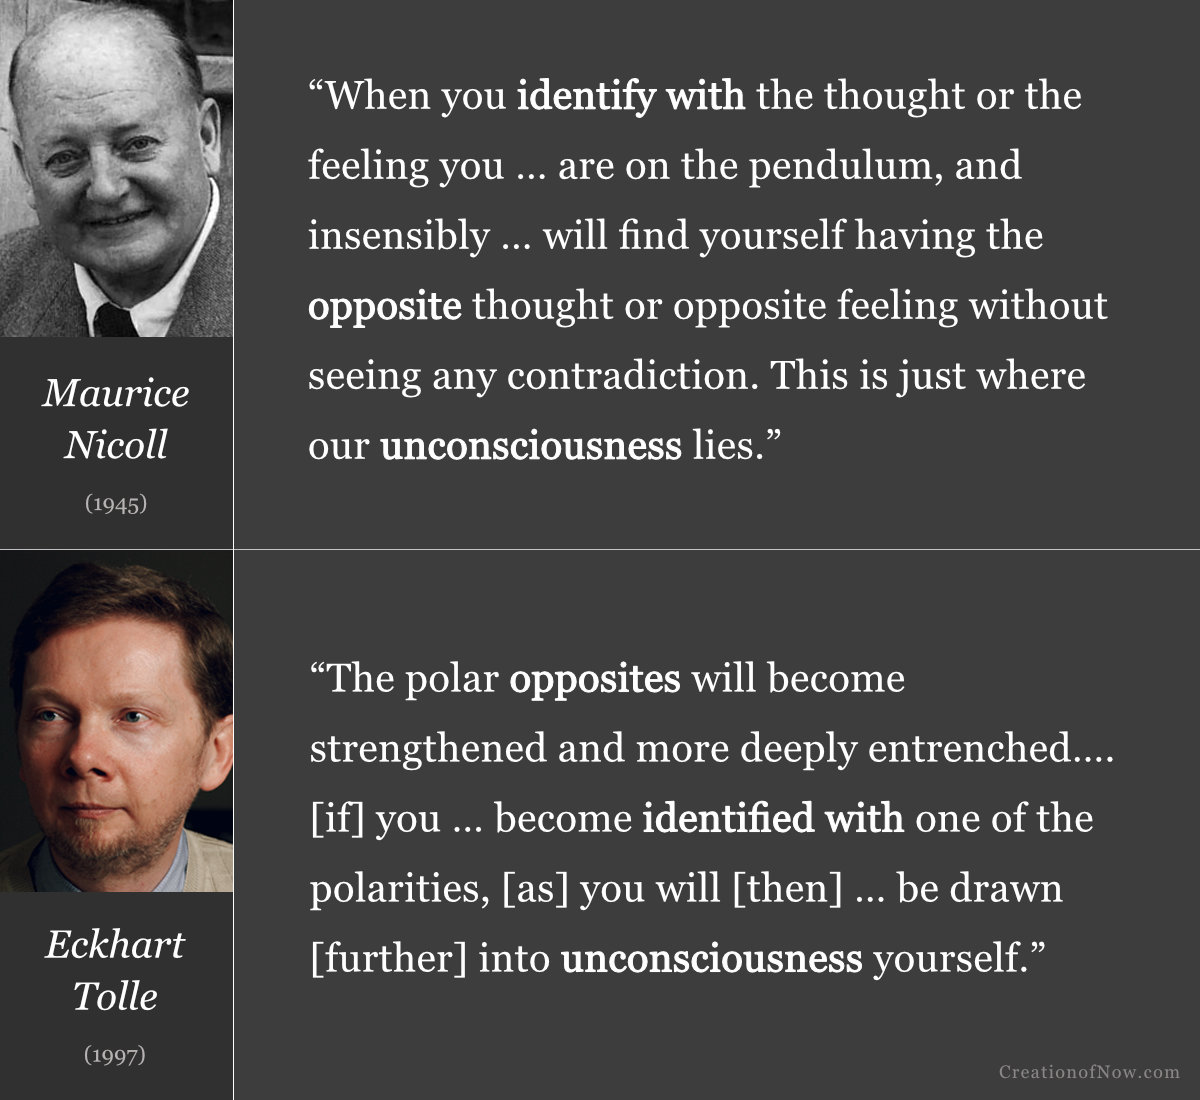 Maurice Nicoll and Eckhart Tolle quotes about identification and unconsciousness